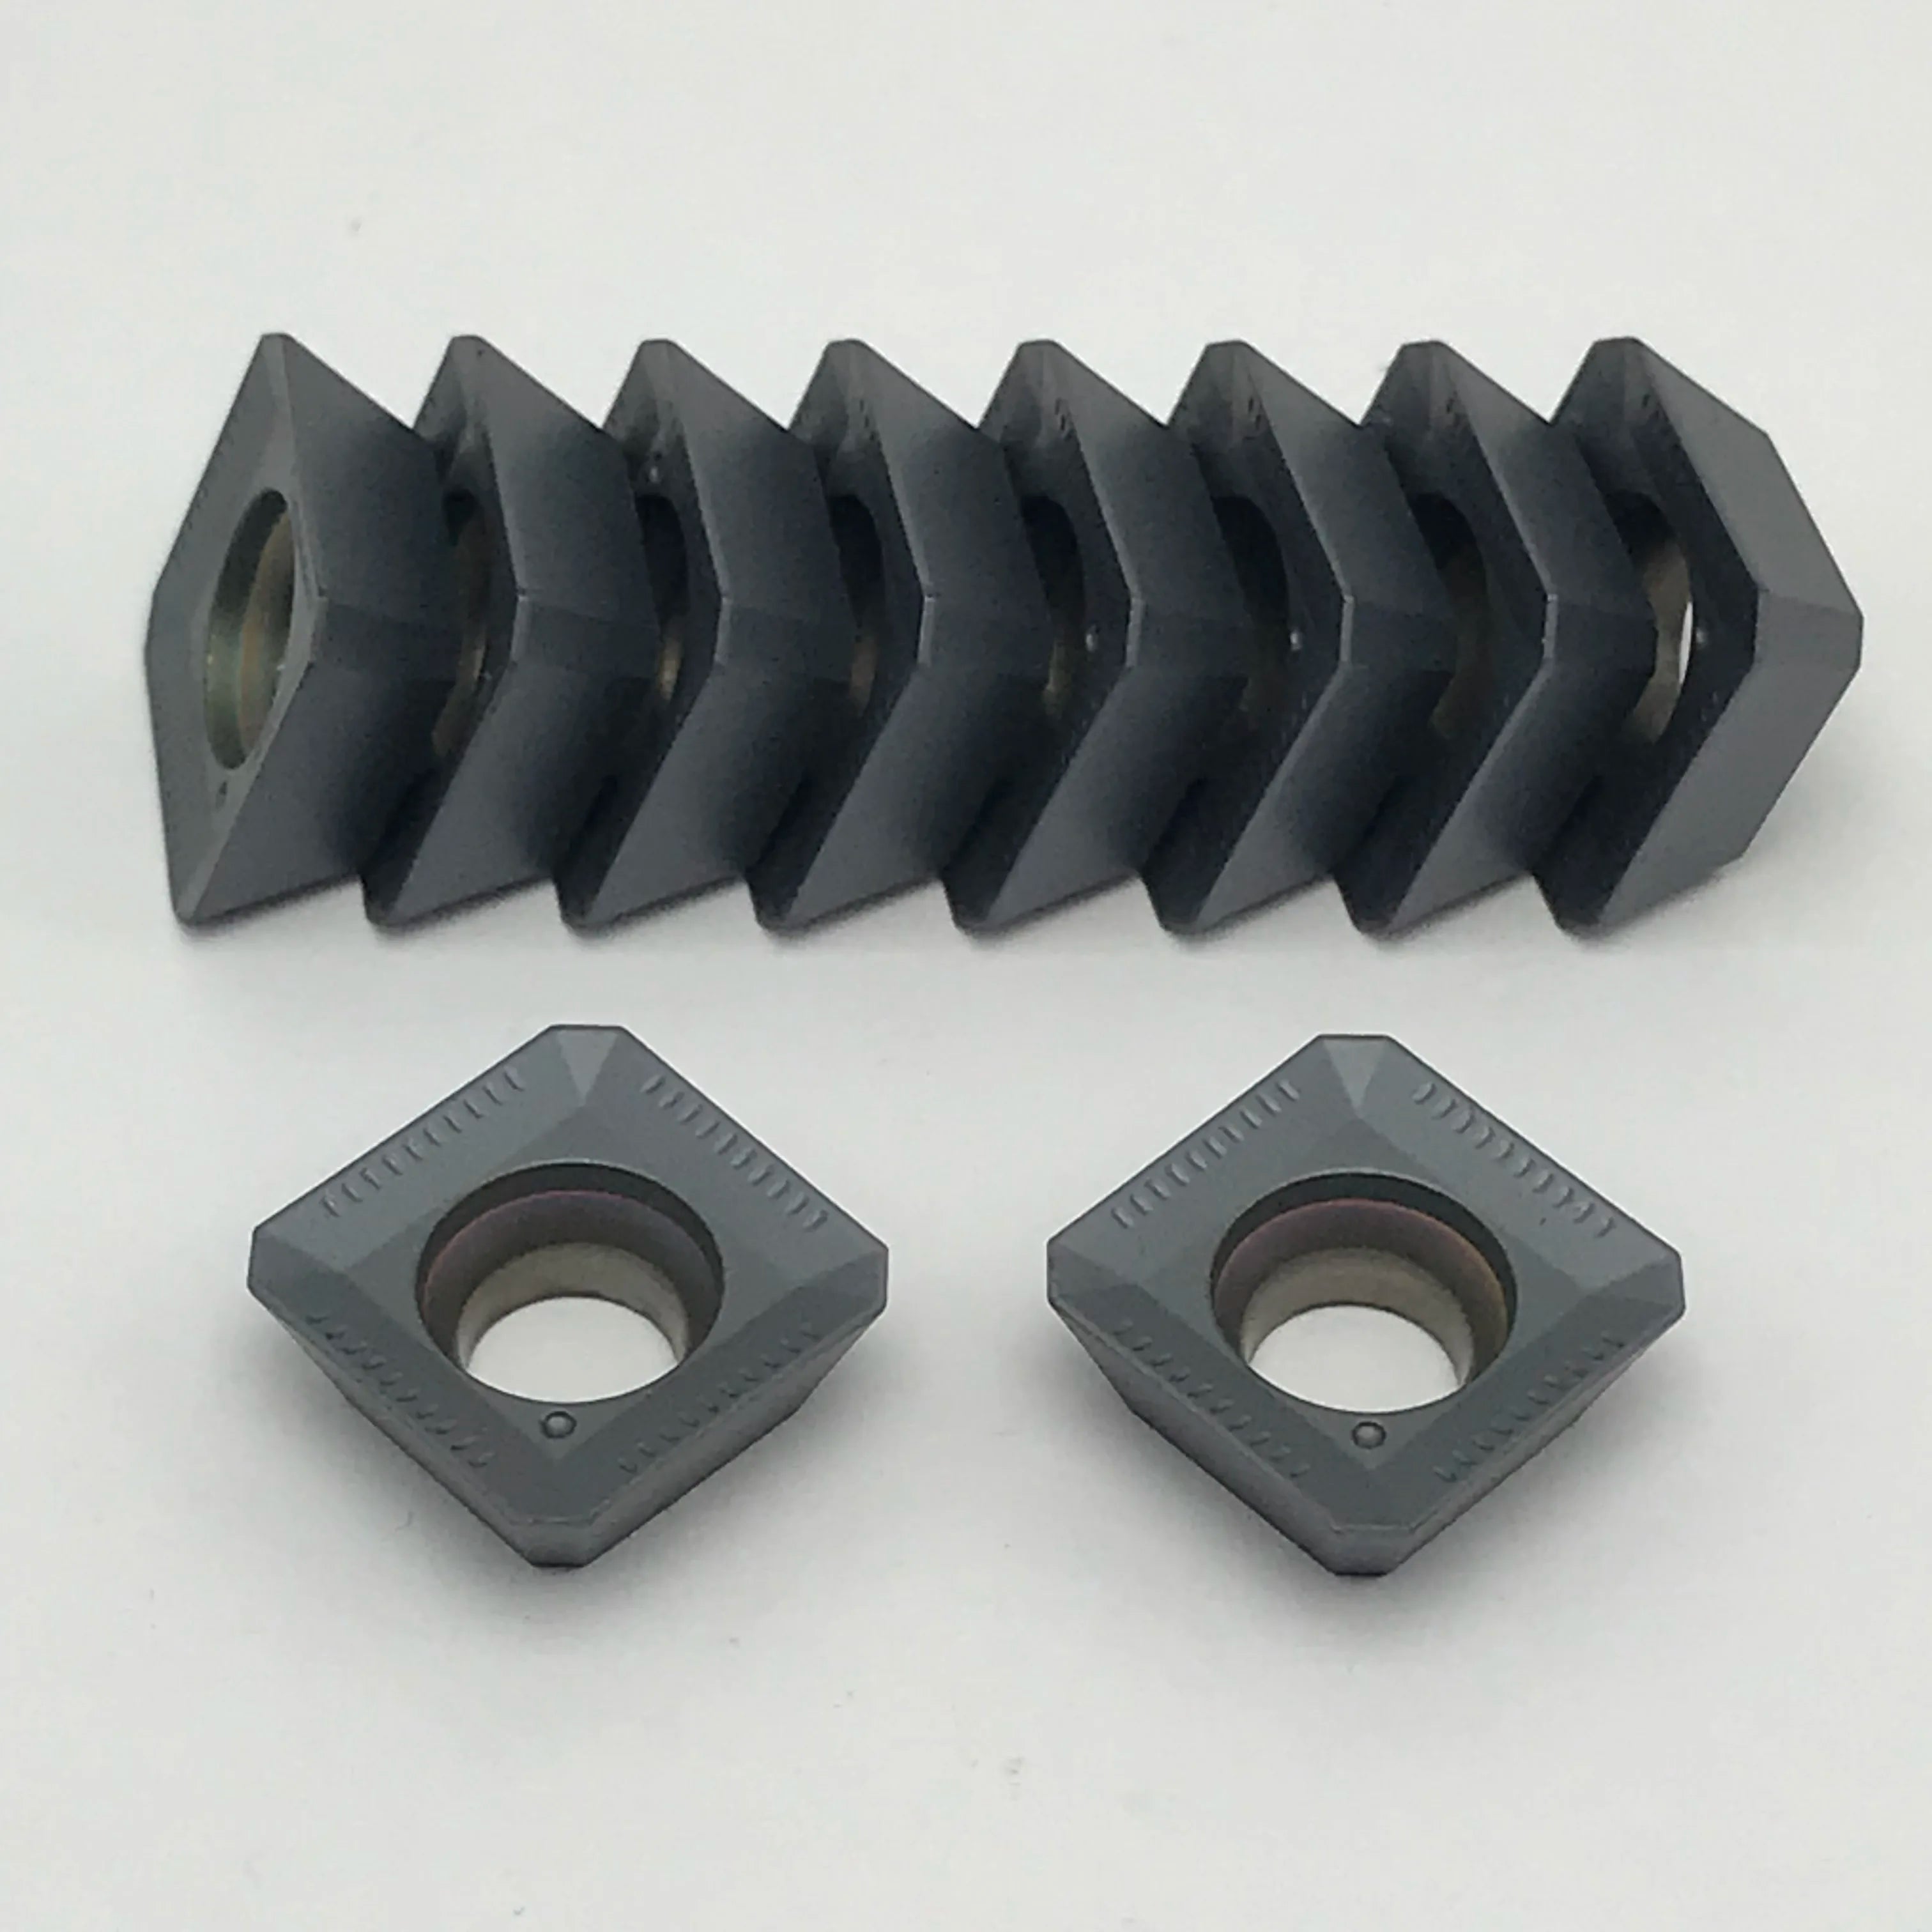 SEKT1204AFTN LT30 Indexable Milling Turning Tools Carbide Insert Lathe Tool High Quality Cutting Tool CNC Milling Insert